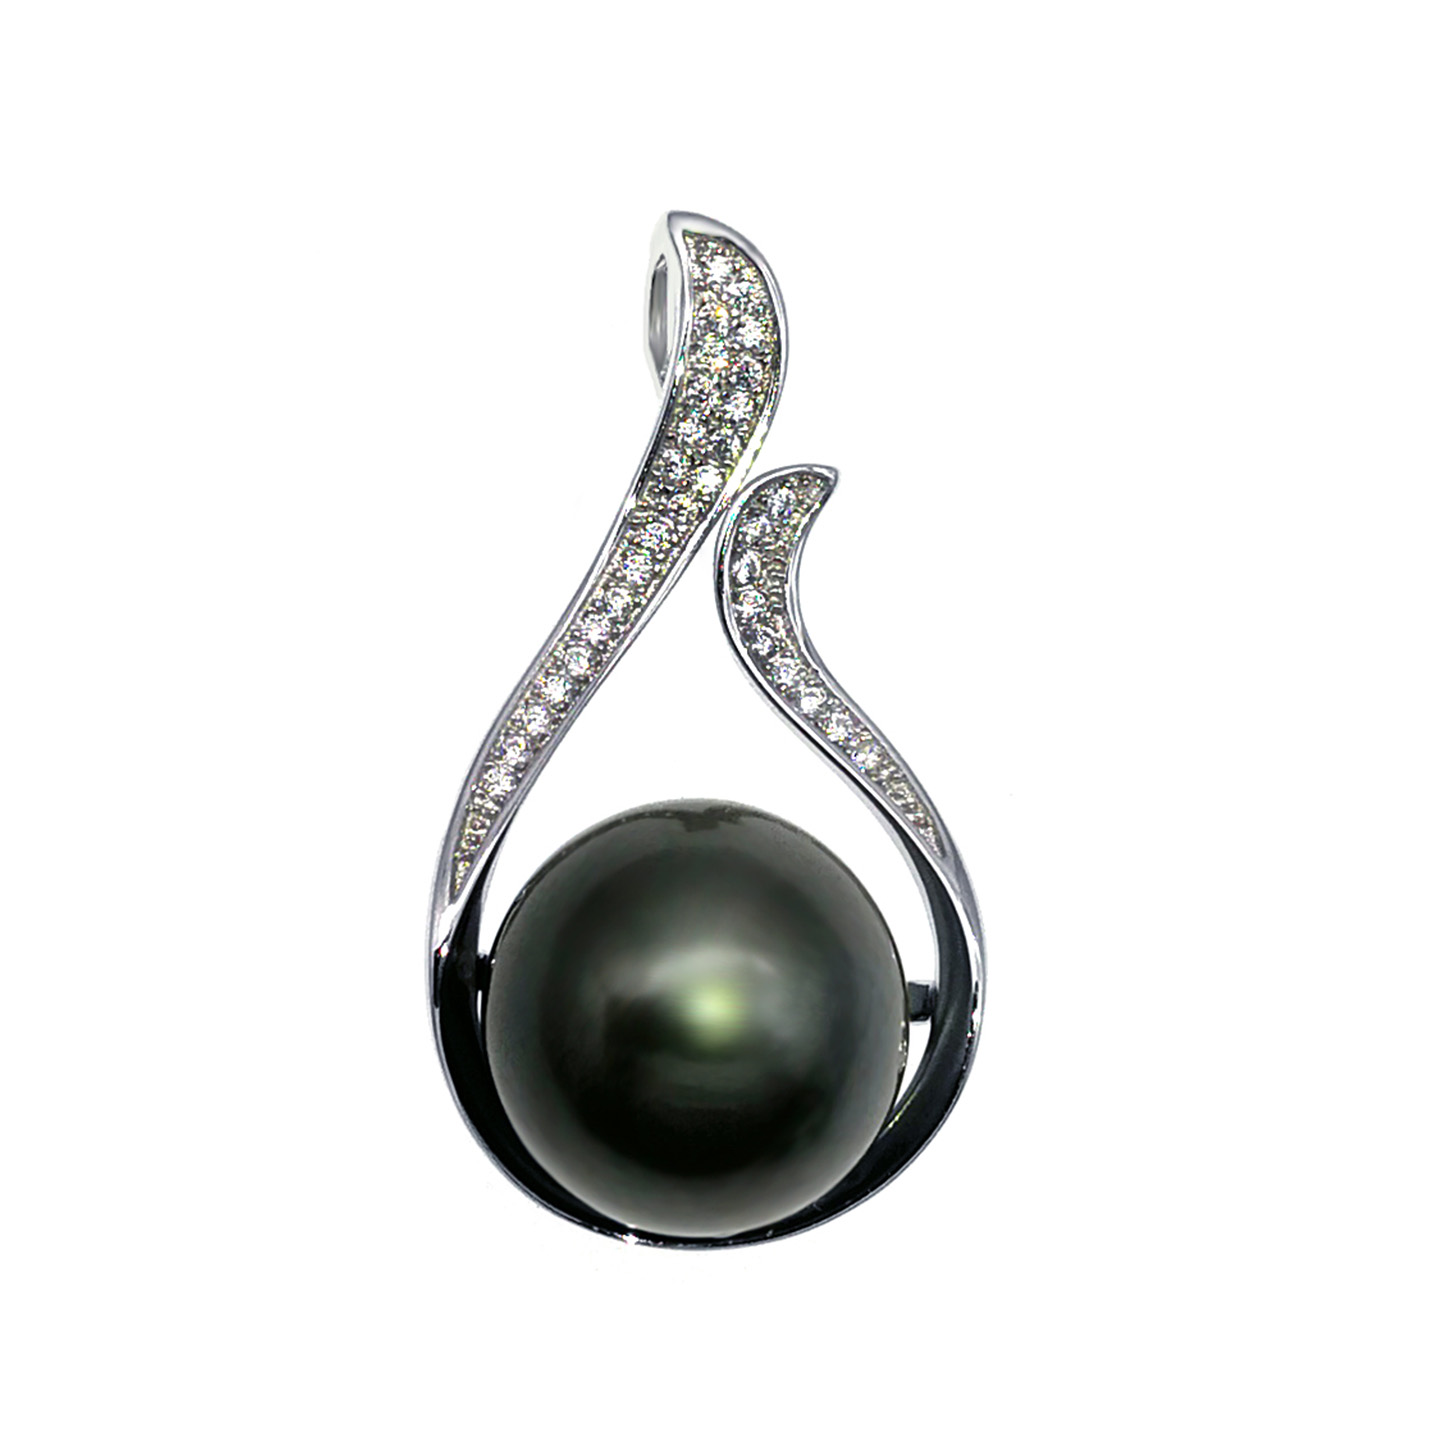 12-13mm Tahitian Pearl with 925 Silver Pendant